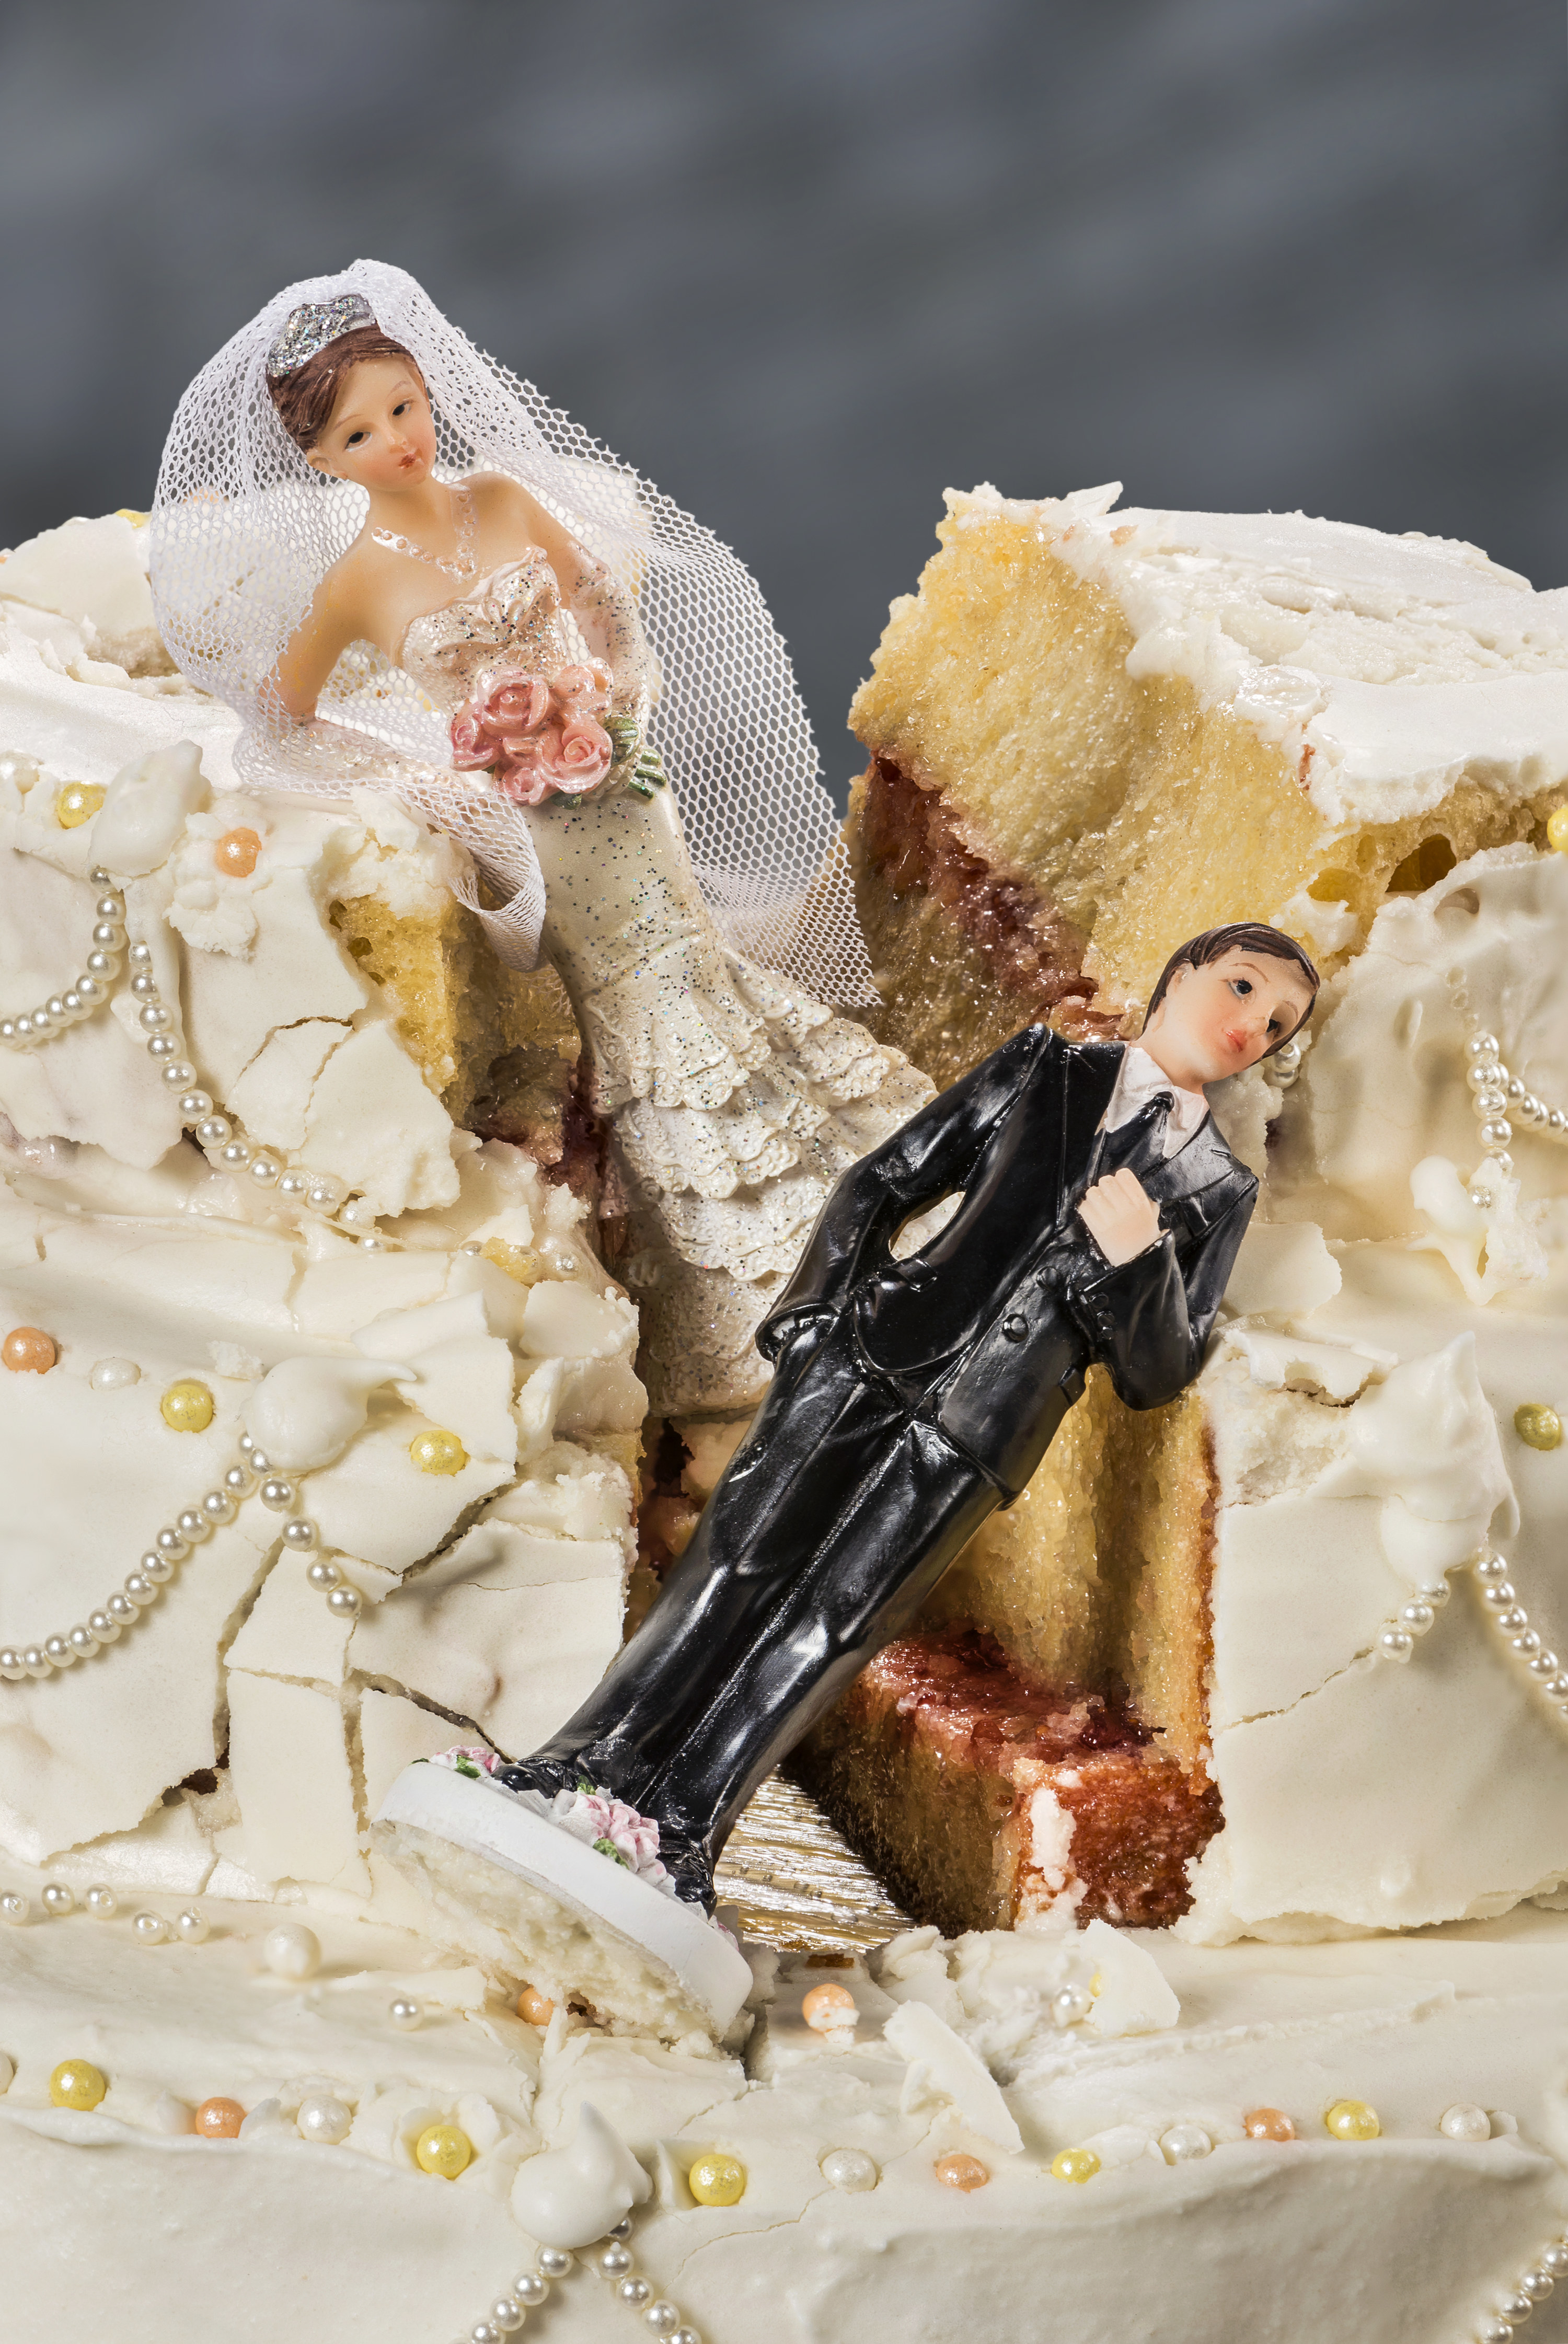 The top of a wedding cake that has been smashed with the bride and groom toppers sliding down the side